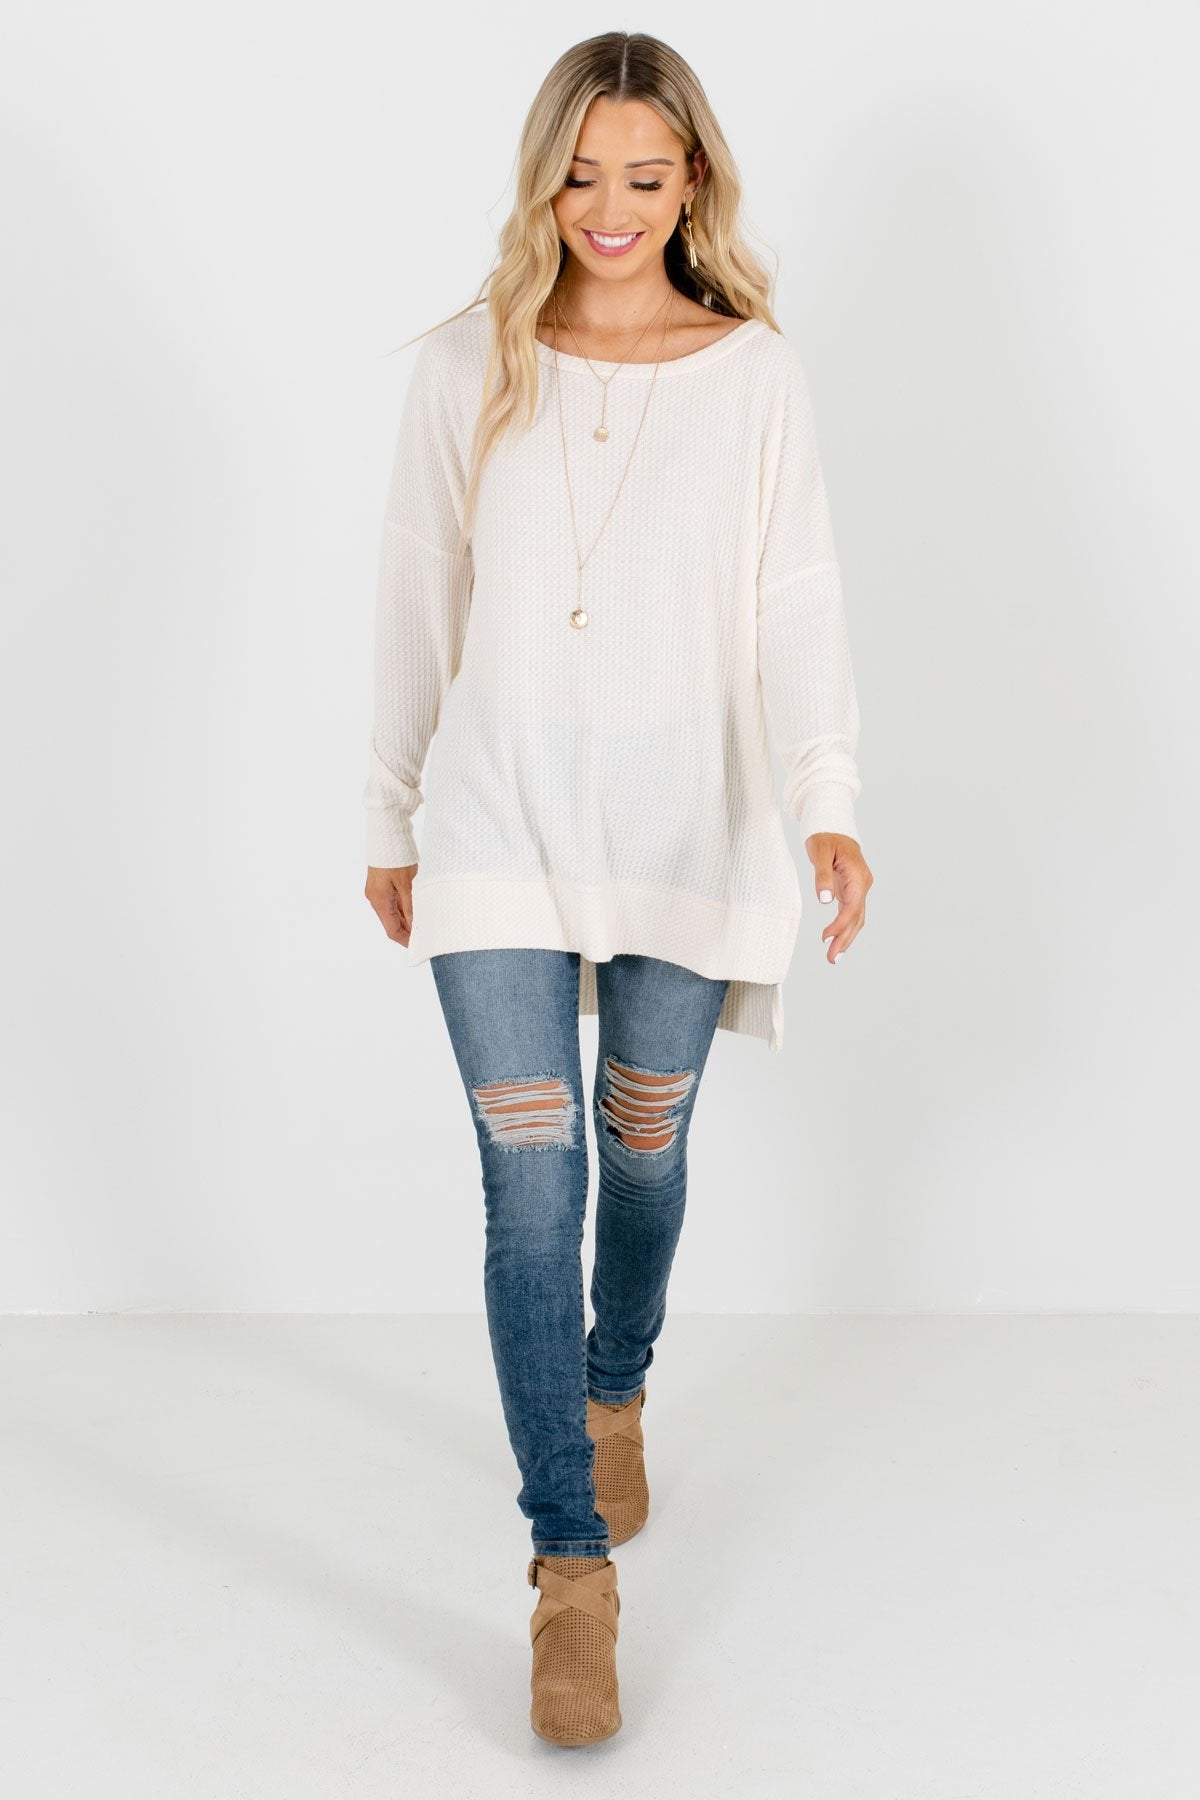 Women’s Cream Fall and Winter Boutique Clothing